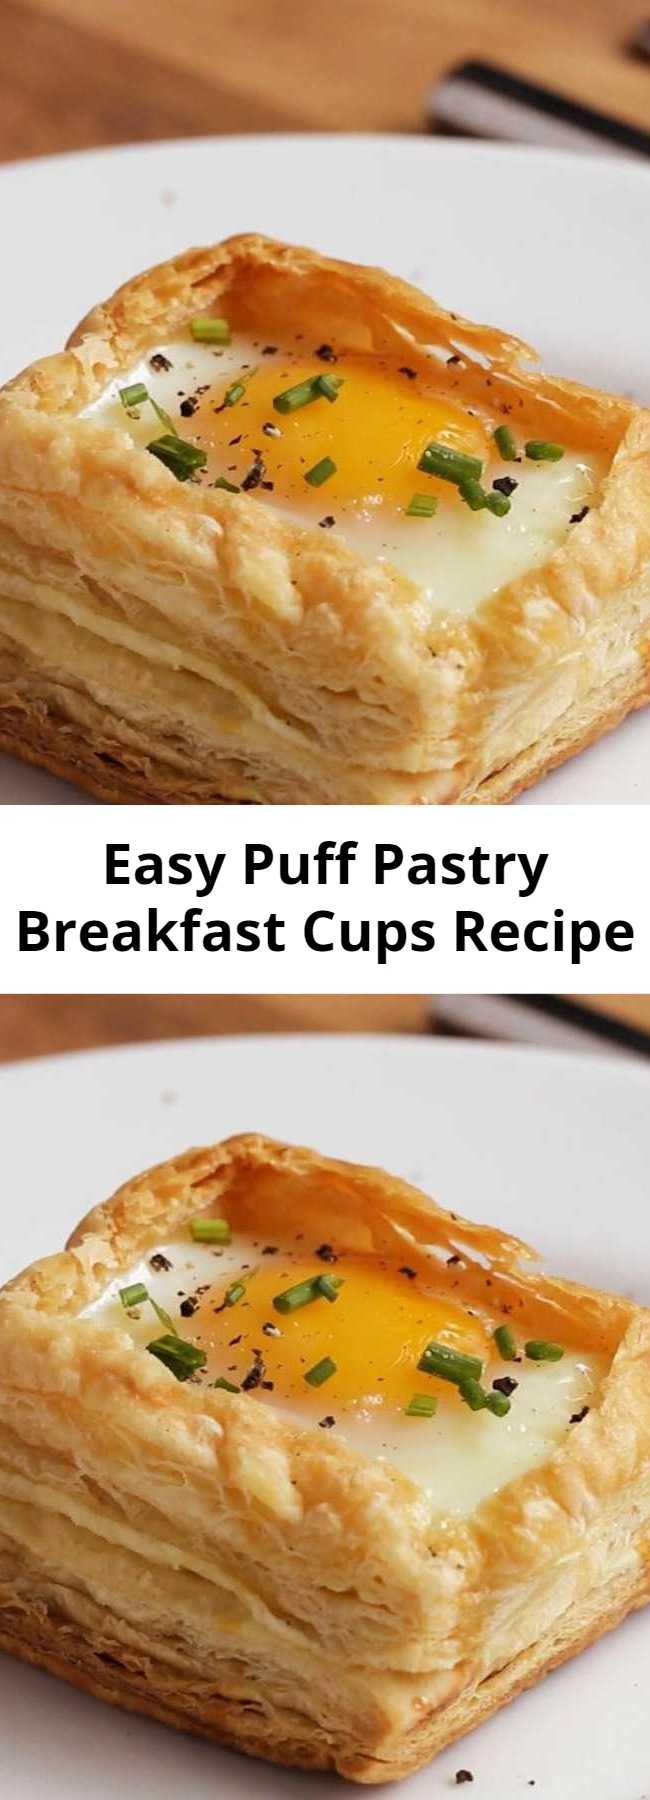 Puff Pastry Breakfast Cups Recipe.